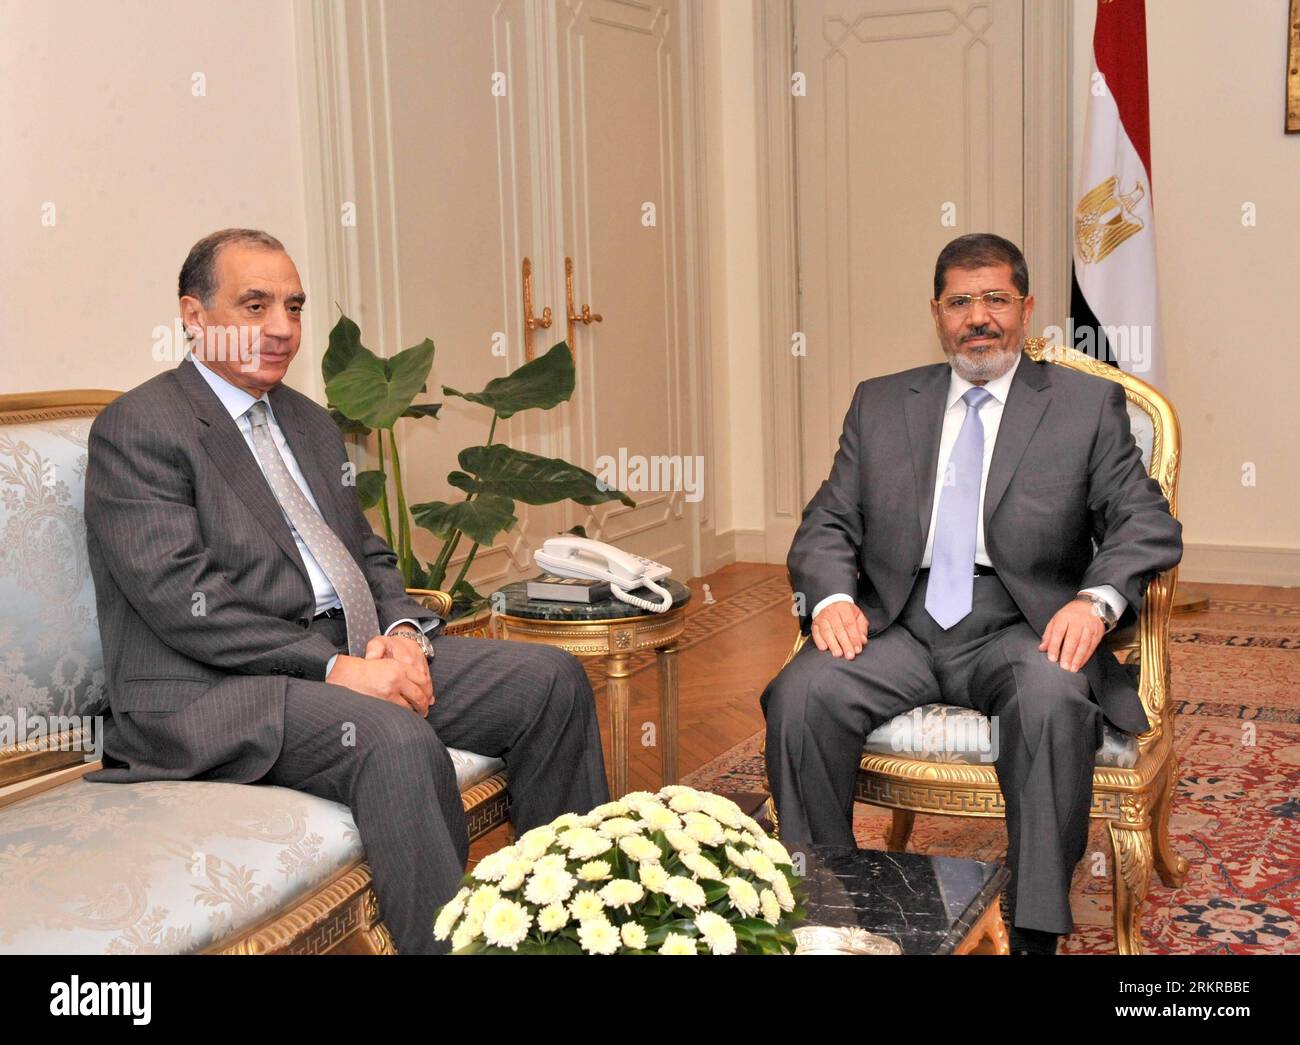 Bildnummer: 58169185  Datum: 01.07.2012  Copyright: imago/Xinhua (120701) -- CAIRO, July 1, 2012 -- (Xinhua) This handout photo from the Egyptian Presidency shows Egypt s new President Mohamed Morsi (R) meets with Egypt s Central Bank Chairman Dr. Farouk Abd El Baky El Okdah in Cairo, July 1, 2012. (Xinhua/Egyptian Presidency) EGYPT-CAIRO-MORSI-OKDAH-MEETING PUBLICATIONxNOTxINxCHN People Politik xjh x0x premiumd 2012 quer      58169185 Date 01 07 2012 Copyright Imago XINHUA  Cairo July 1 2012 XINHUA This handout Photo from The Egyptian Presidency Shows Egypt S New President Mohamed Morsi r Mee Stock Photo